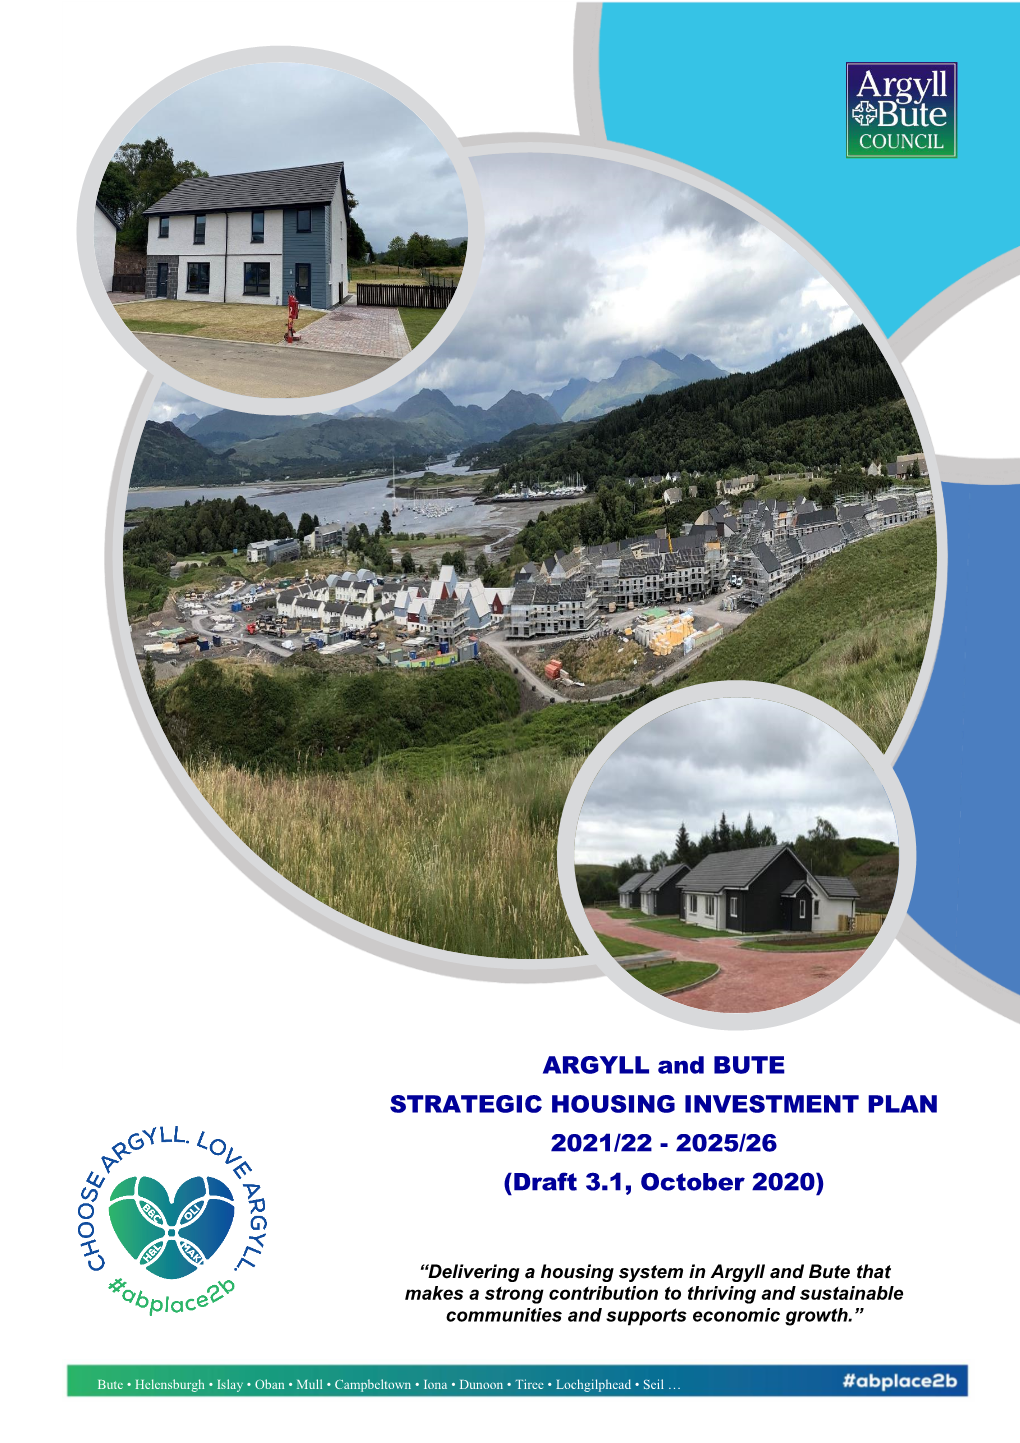 ARGYLL and BUTE STRATEGIC HOUSING INVESTMENT PLAN 2021/22 - 2025/26 (Draft 3.1, October 2020)